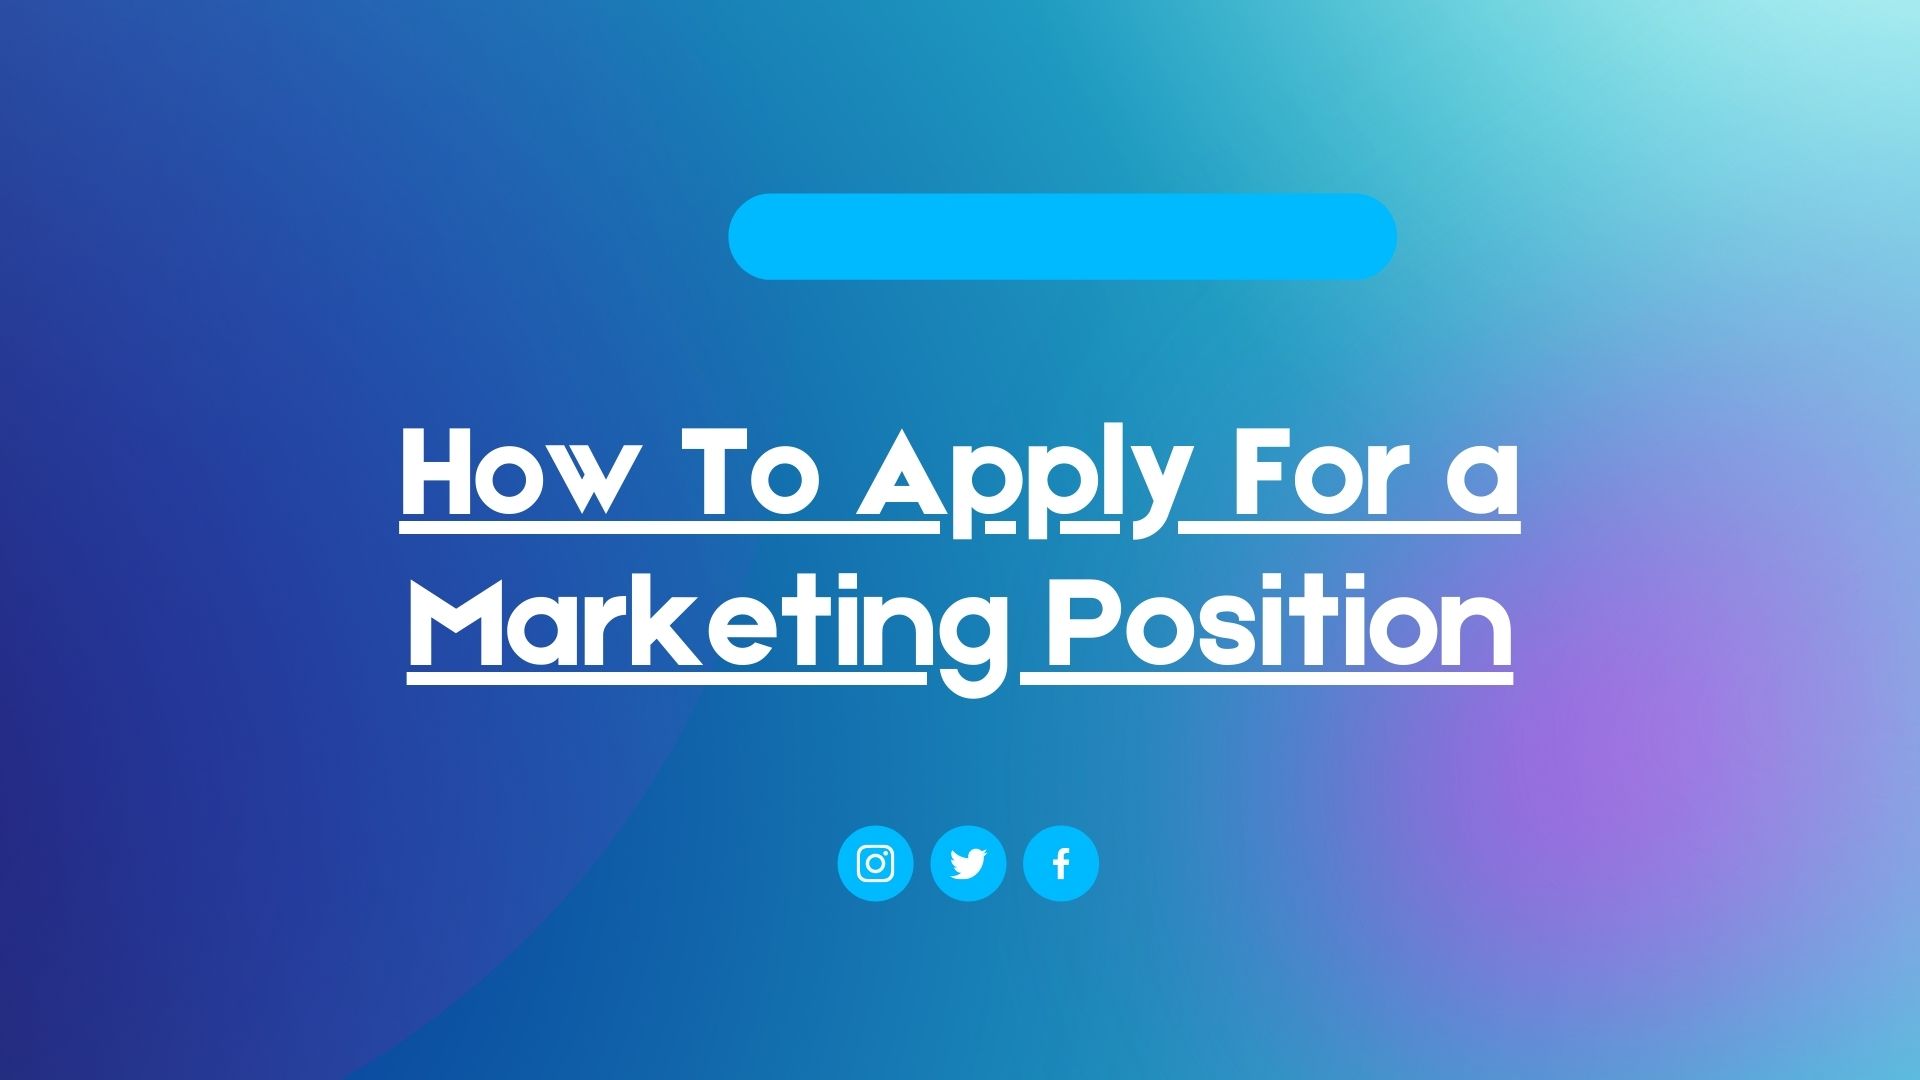 How To Apply For a Marketing Position